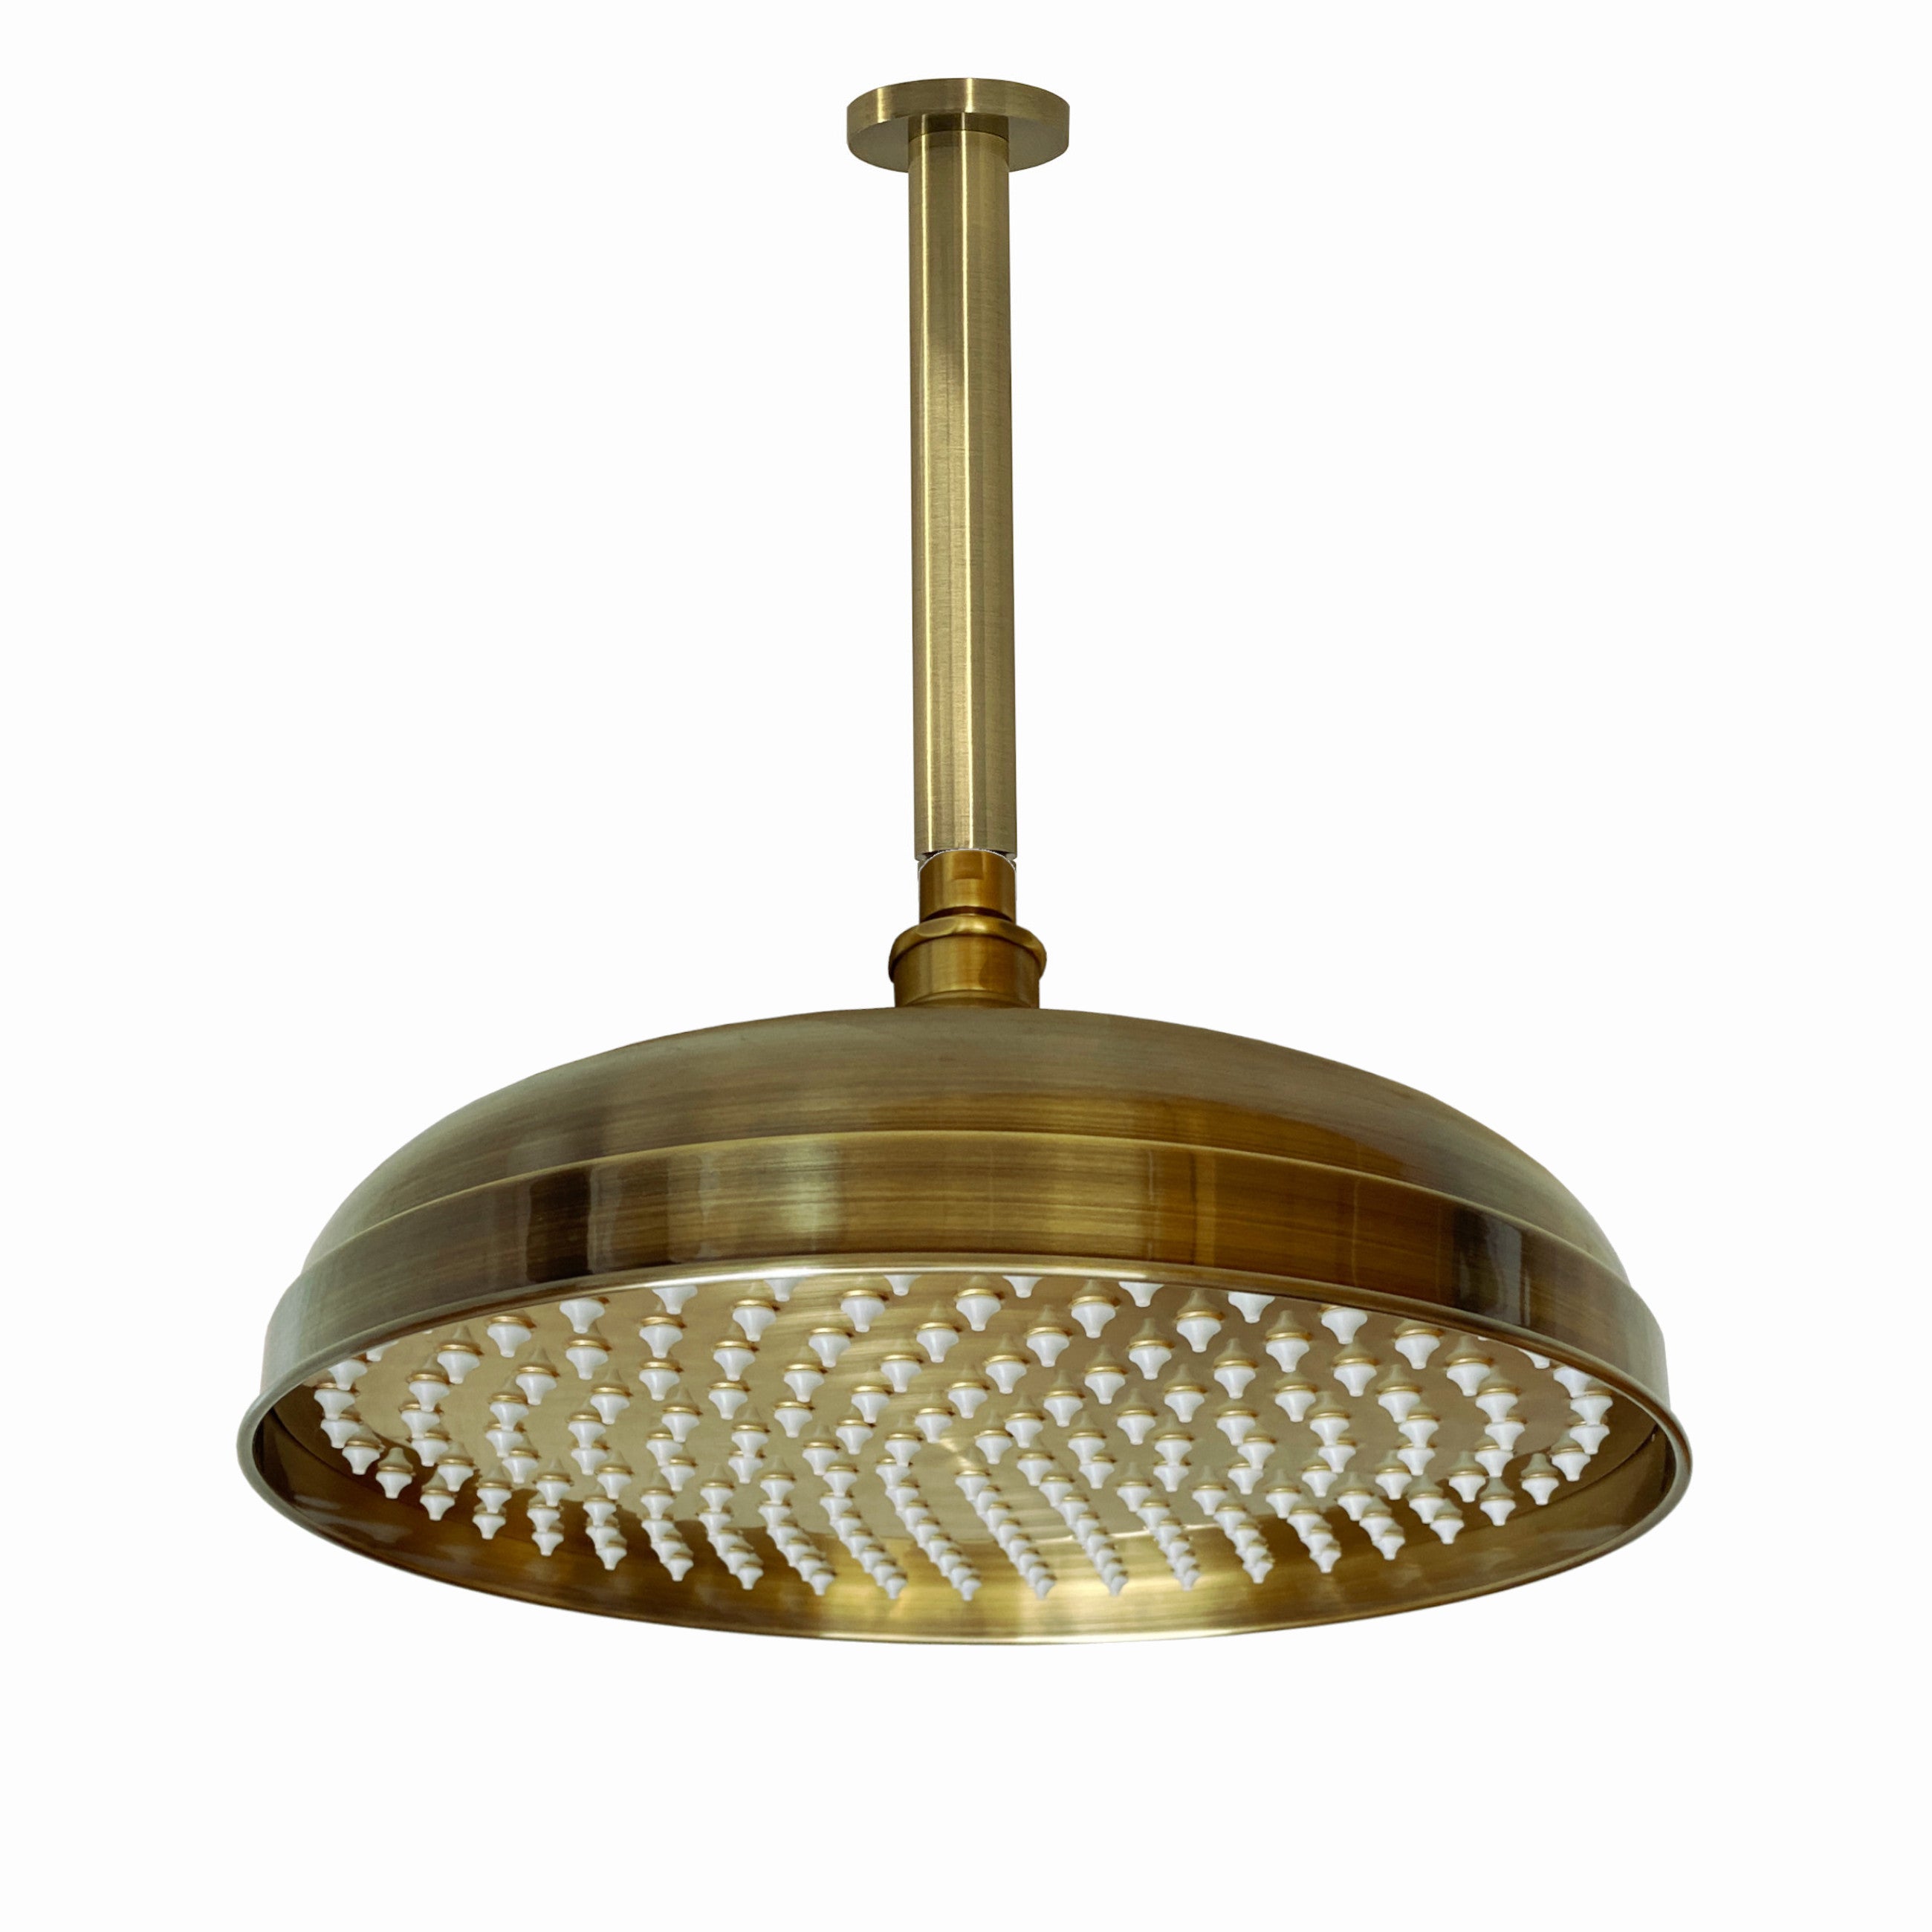 Traditional Ceiling Fixed Apron Brass Shower Head 12" With 180mm Ceiling Shower Arm - Antique Bronze